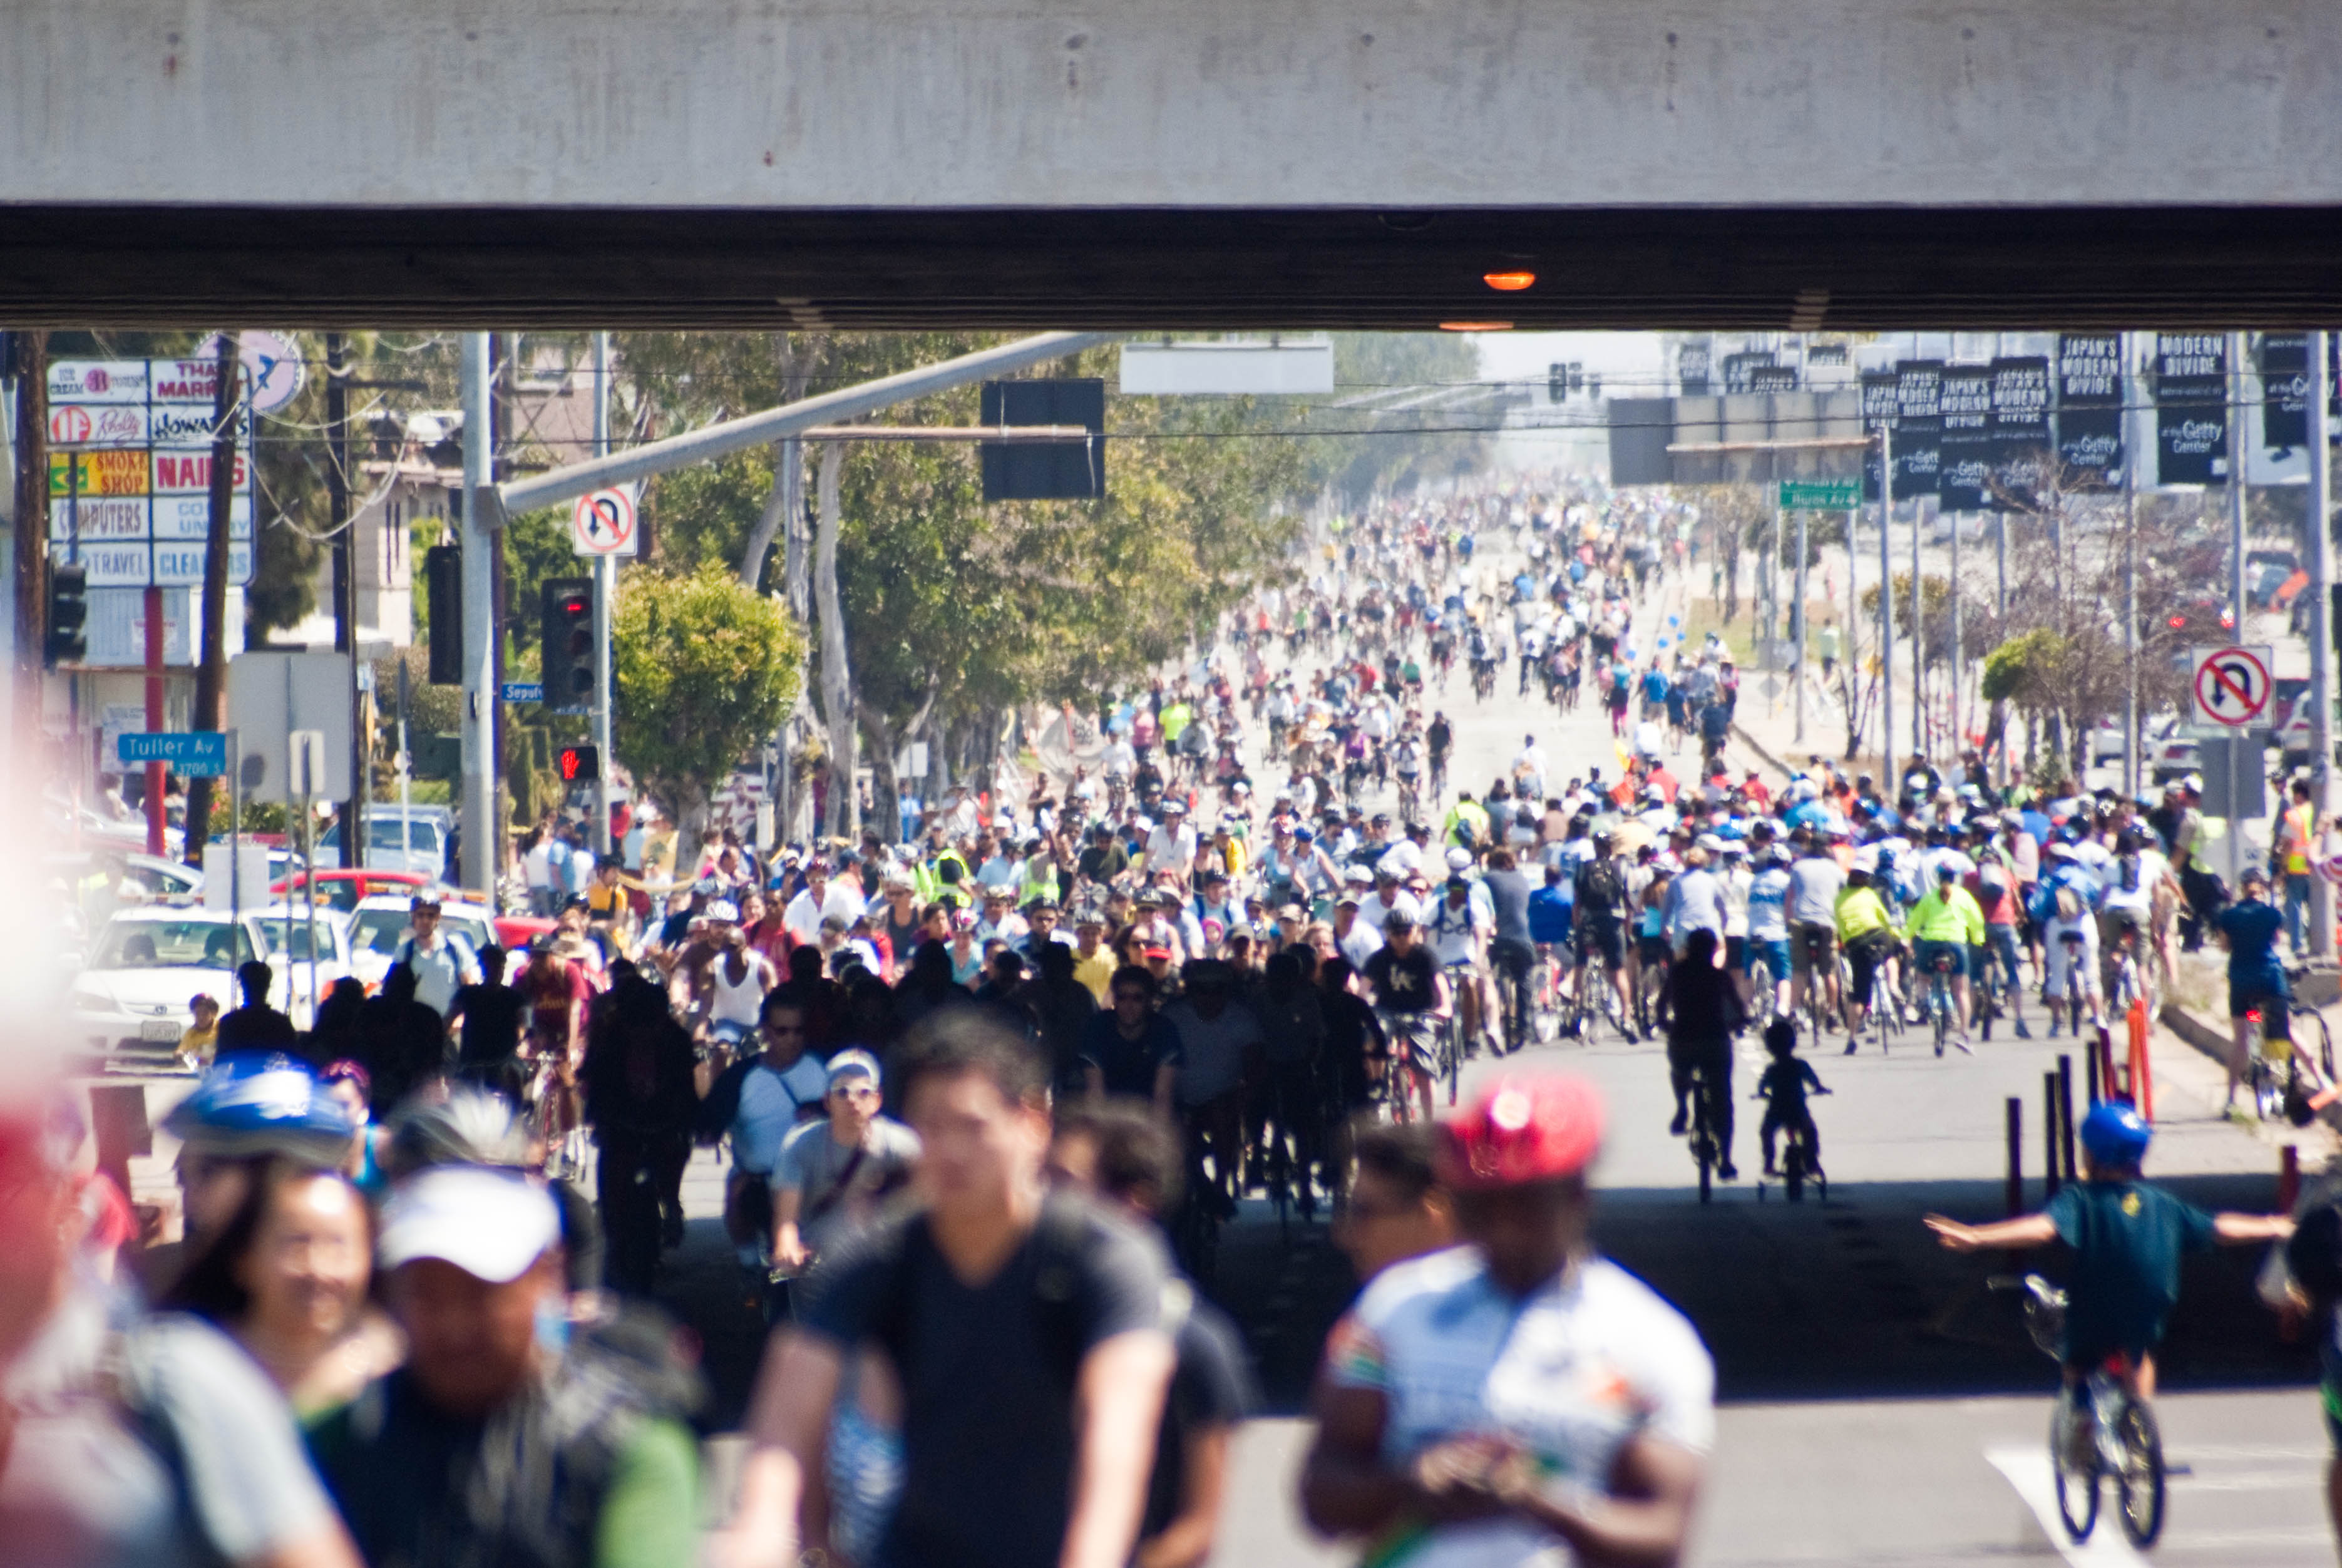 20181 CicLAvia passes under the 405 San Diego Freeway on Venice Blvd